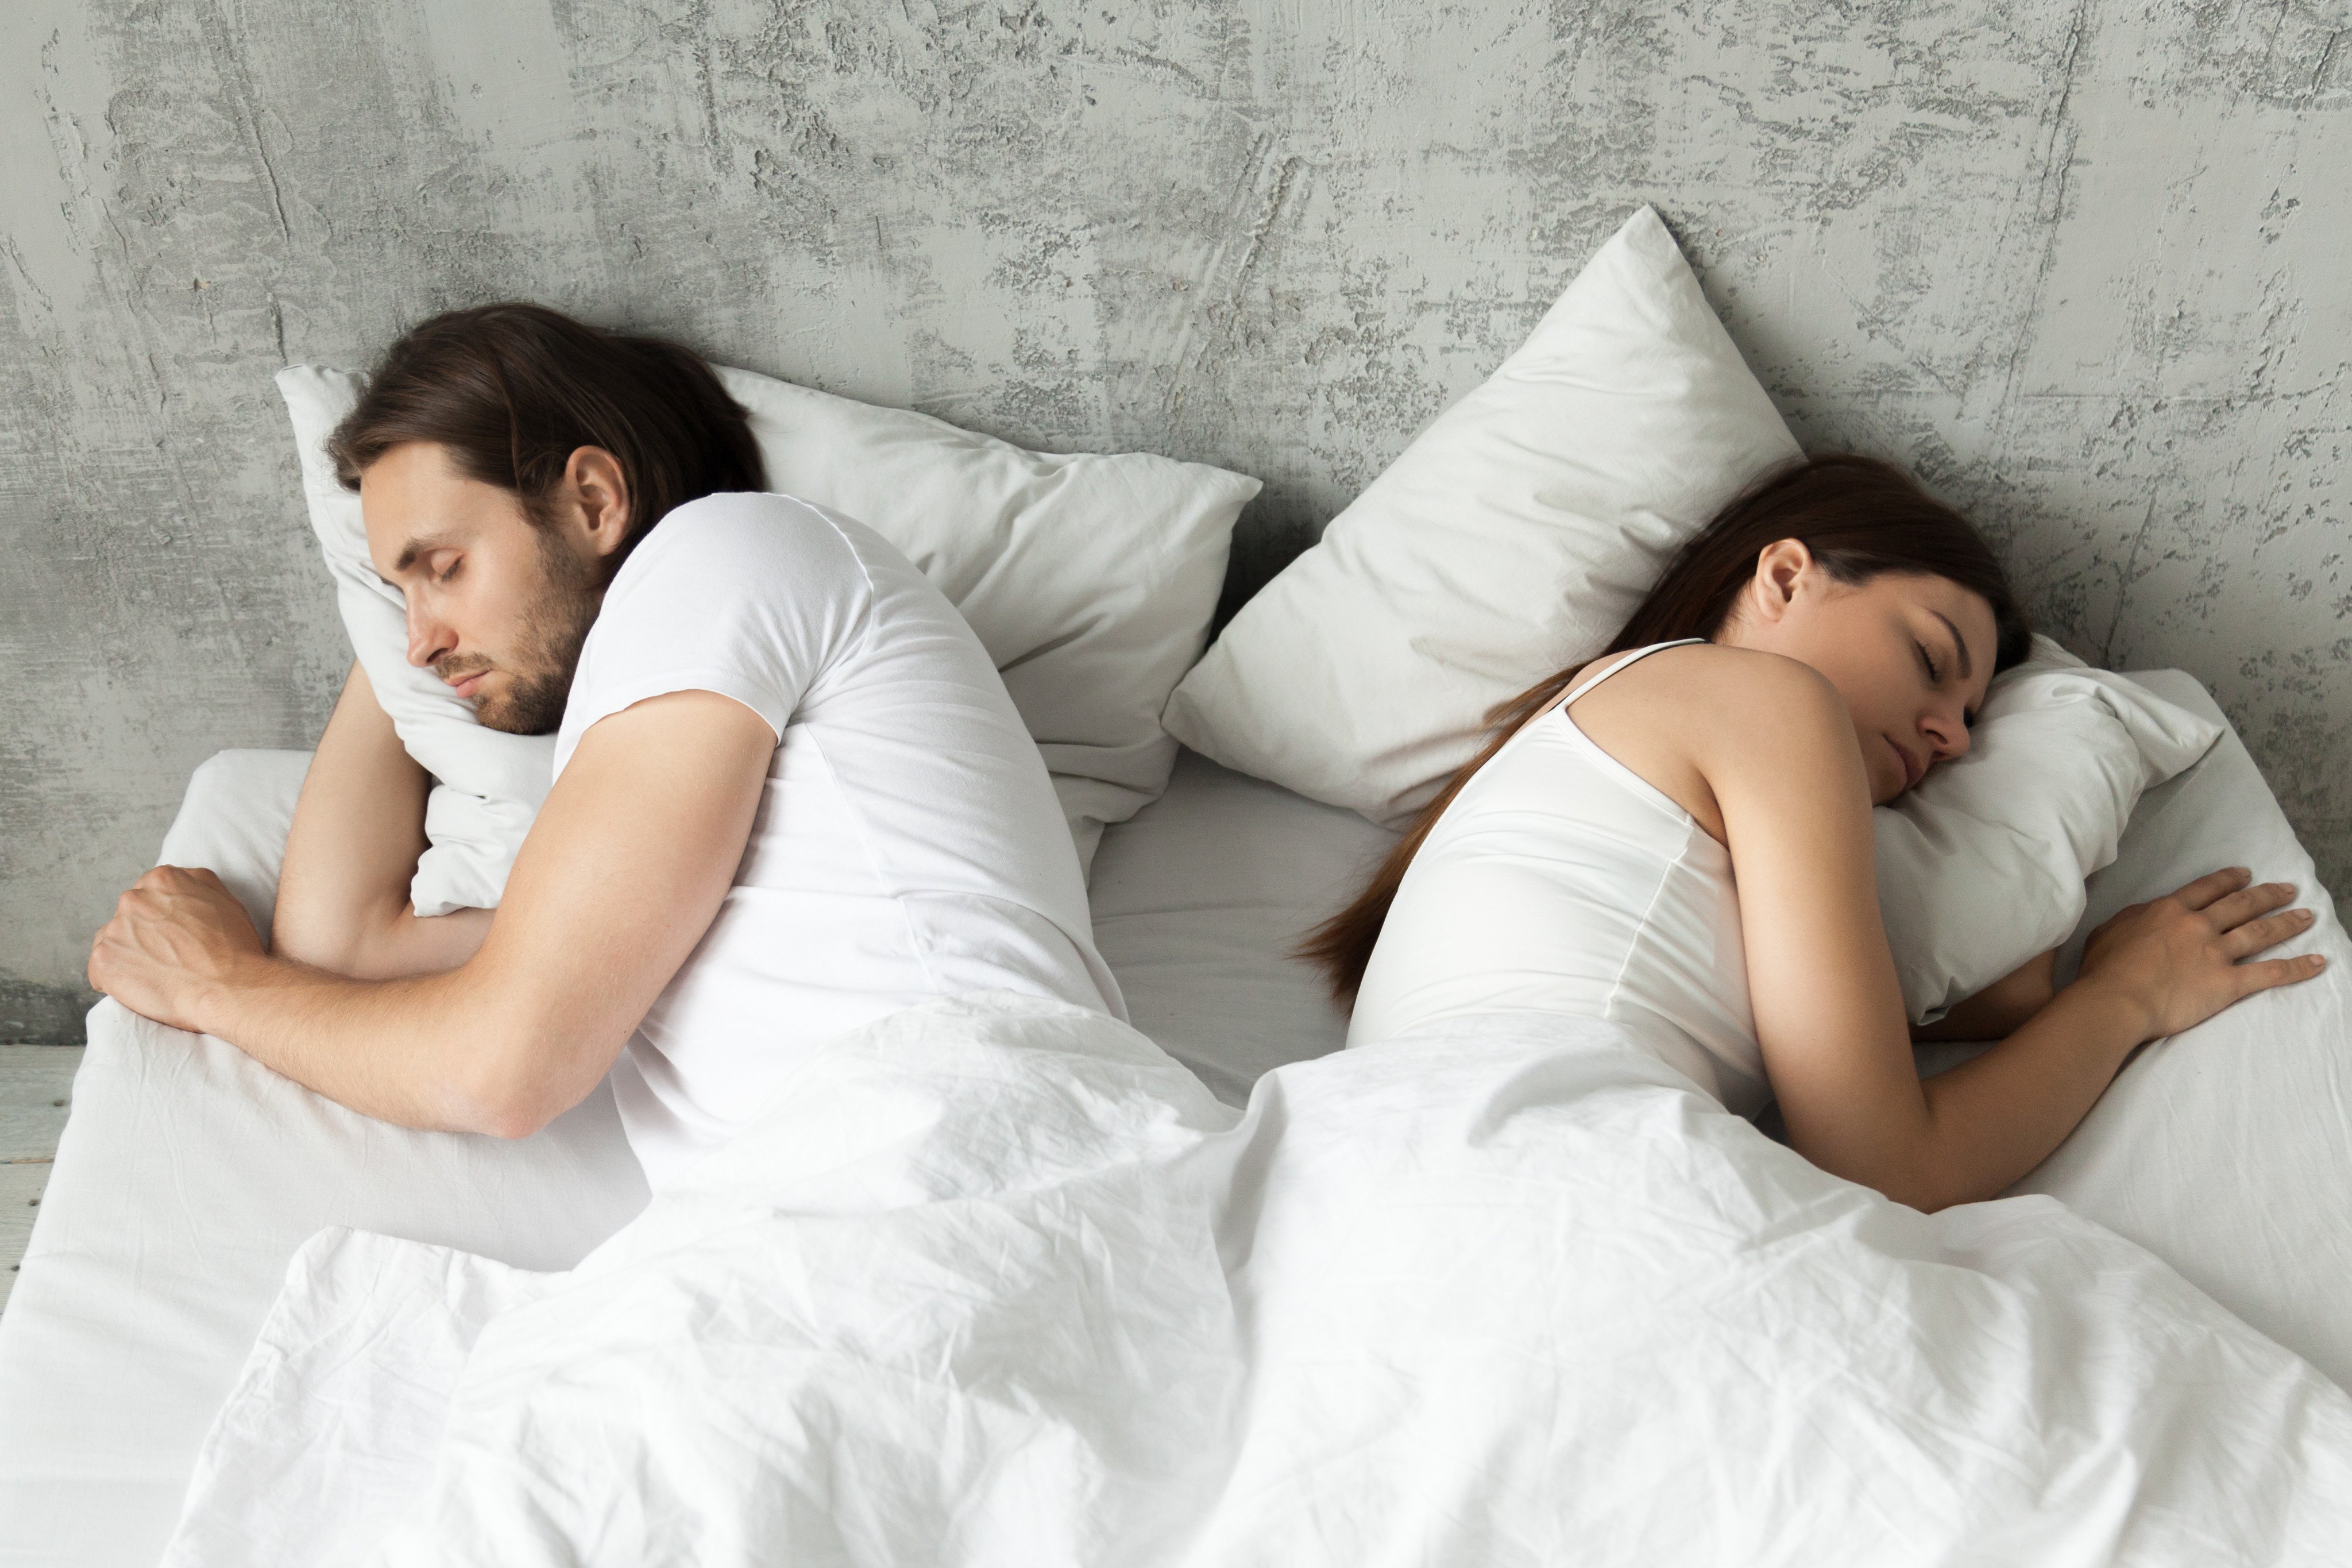 The idea of ‘sleep divorce’ hit the headlines recently after Cameron Diaz espoused its benefits. Here are the pros and cons of couples sleeping in separate bedrooms, which can even benefit their sex lives. Photo: Shutterstock